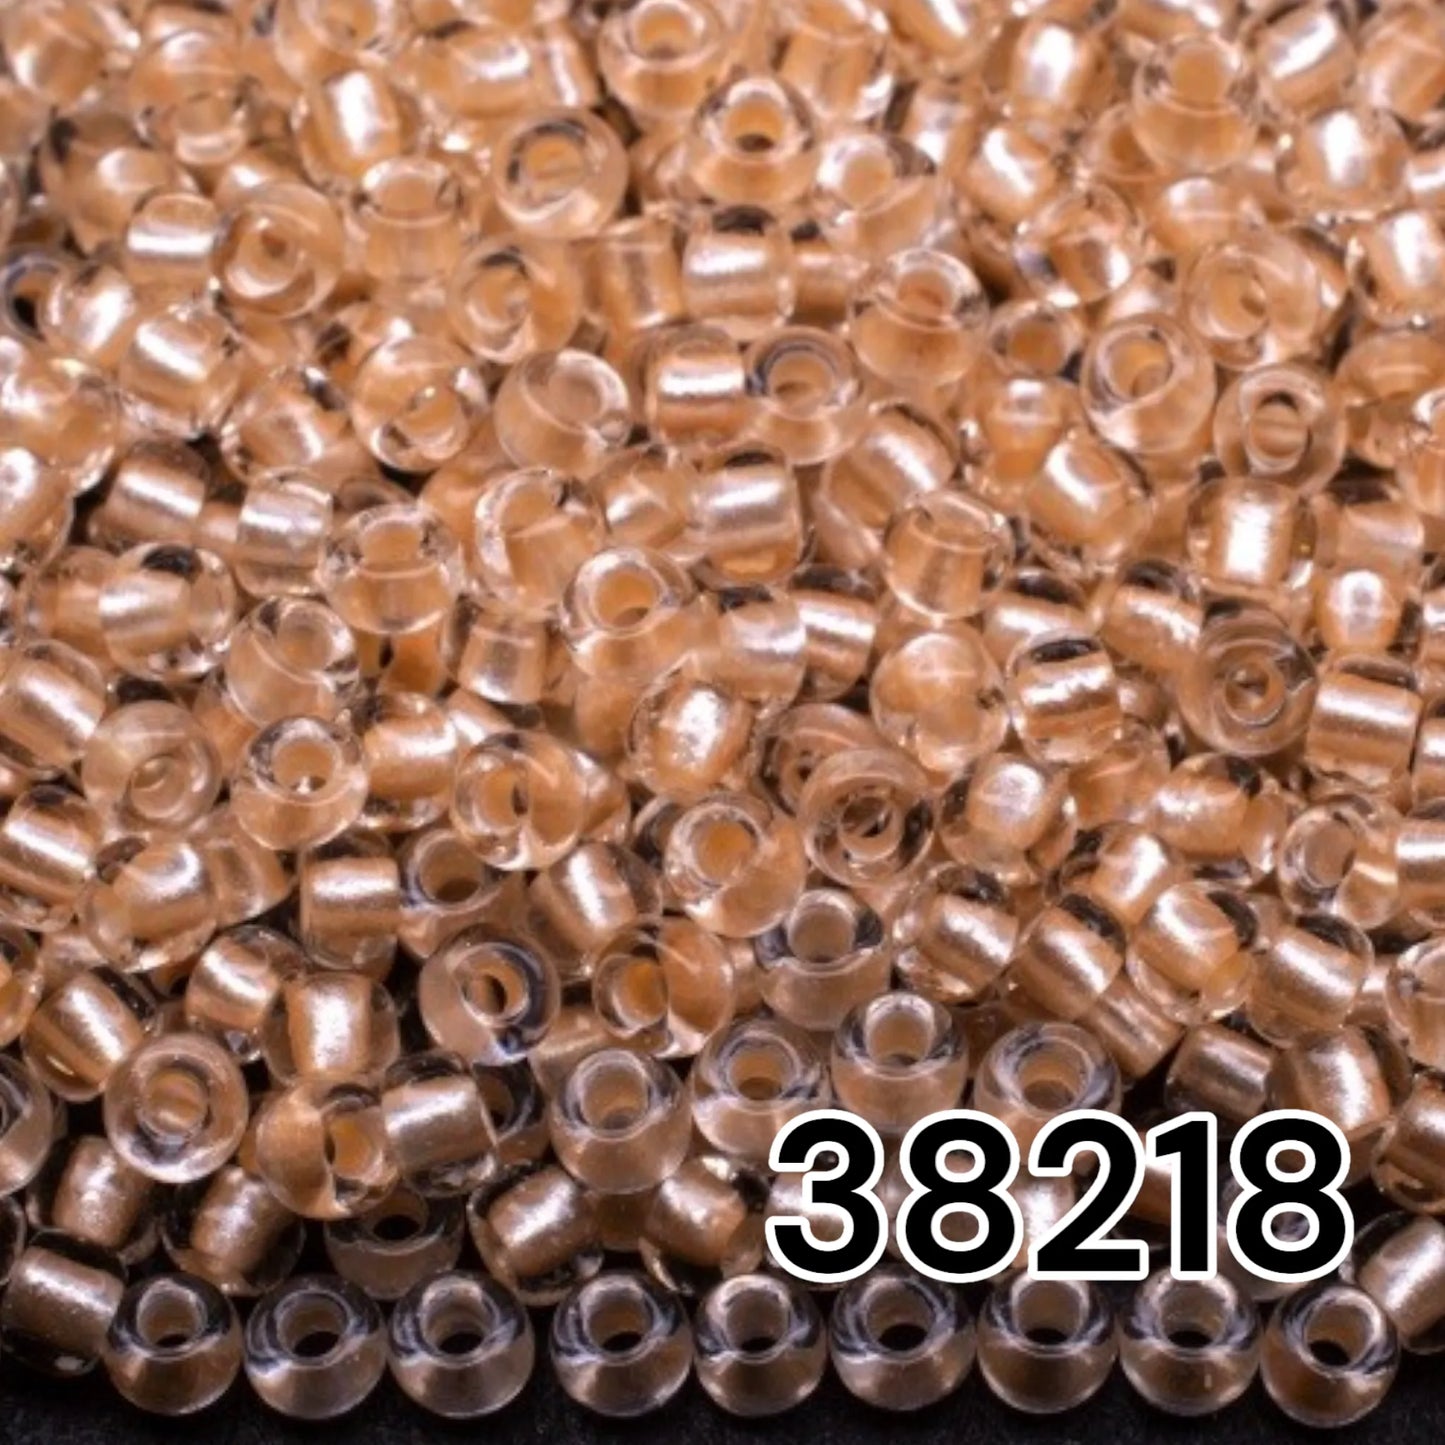 38218 Czech seed beads PRECIOSA Rocailles 10/0 beige. Crystal - Terra Pearl Lined.